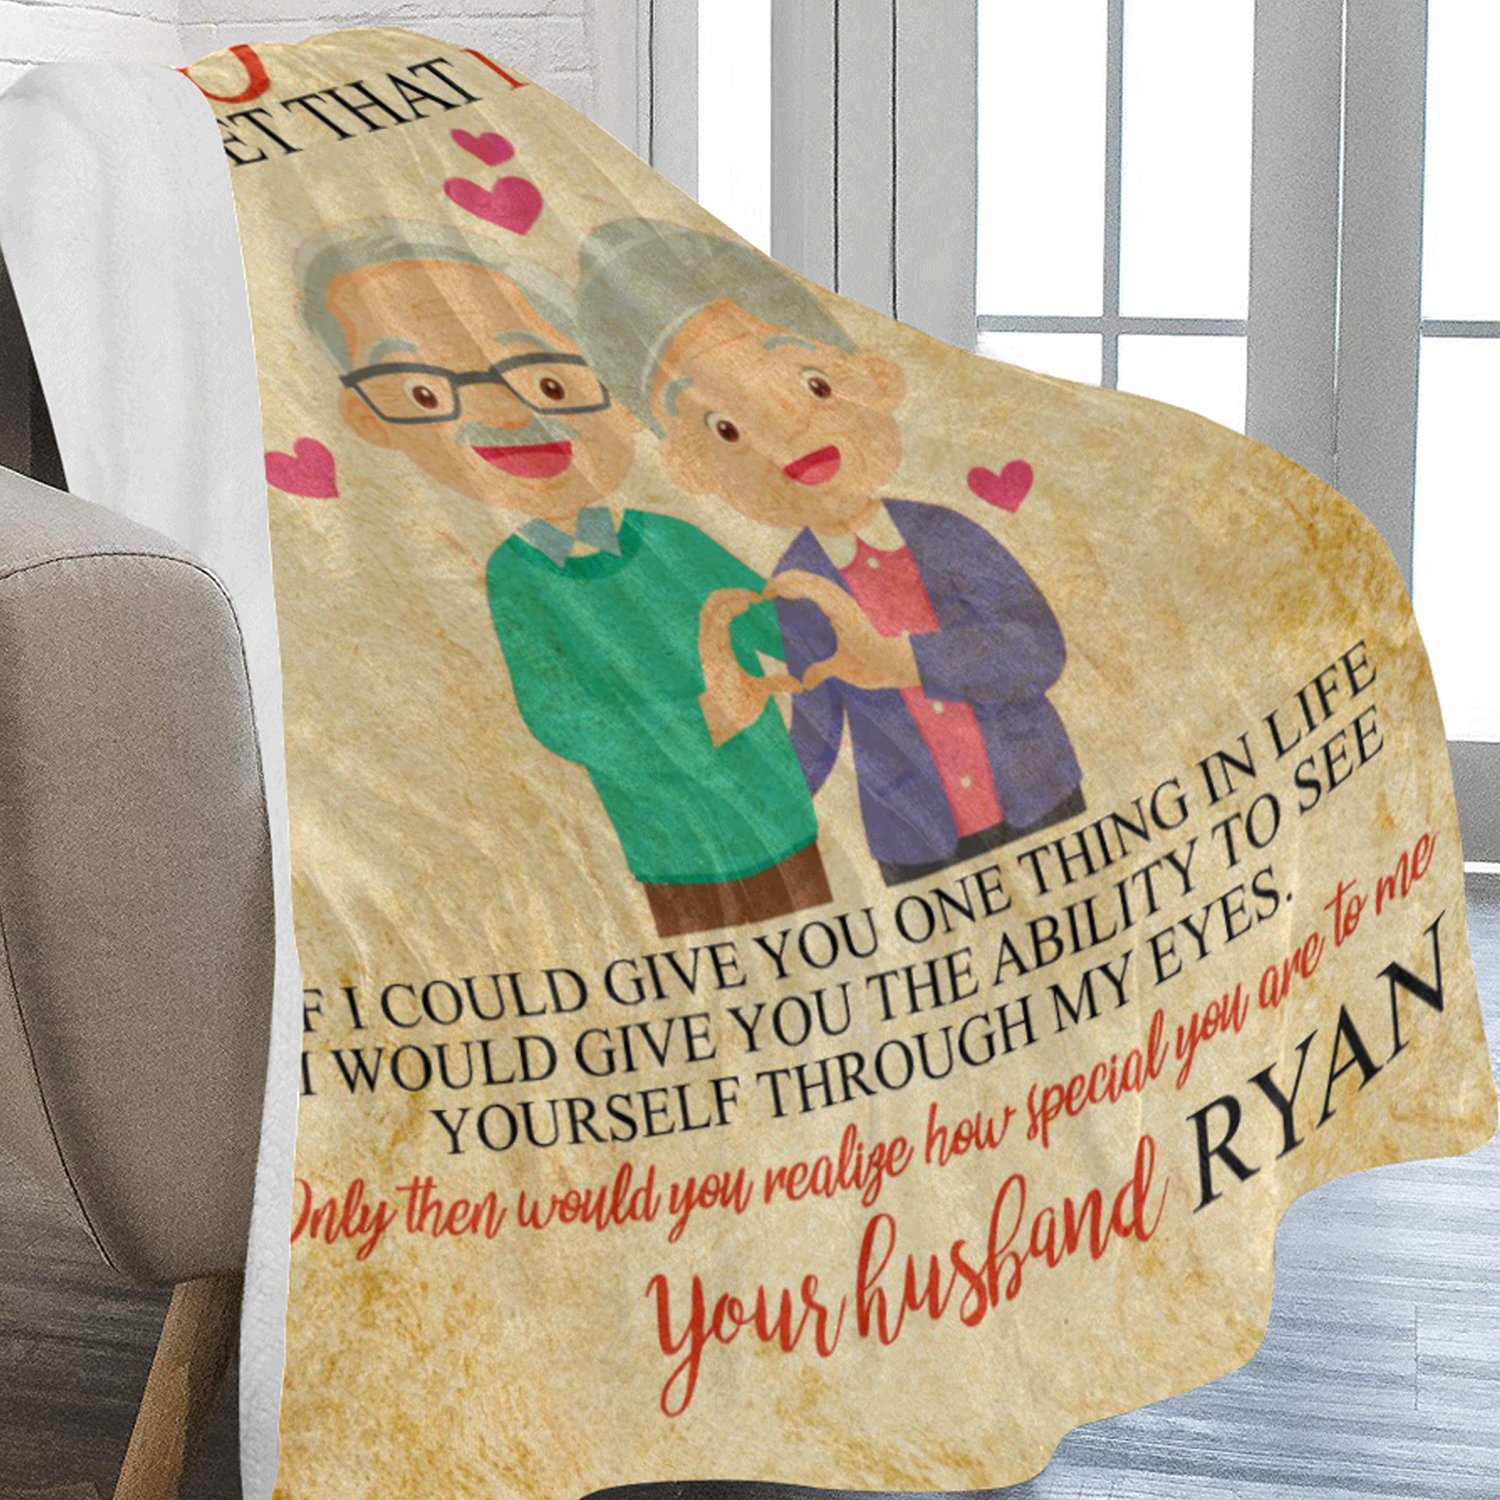 Personalized Gift For Wife - Never Forget That I Love You Blanket - Teegarb